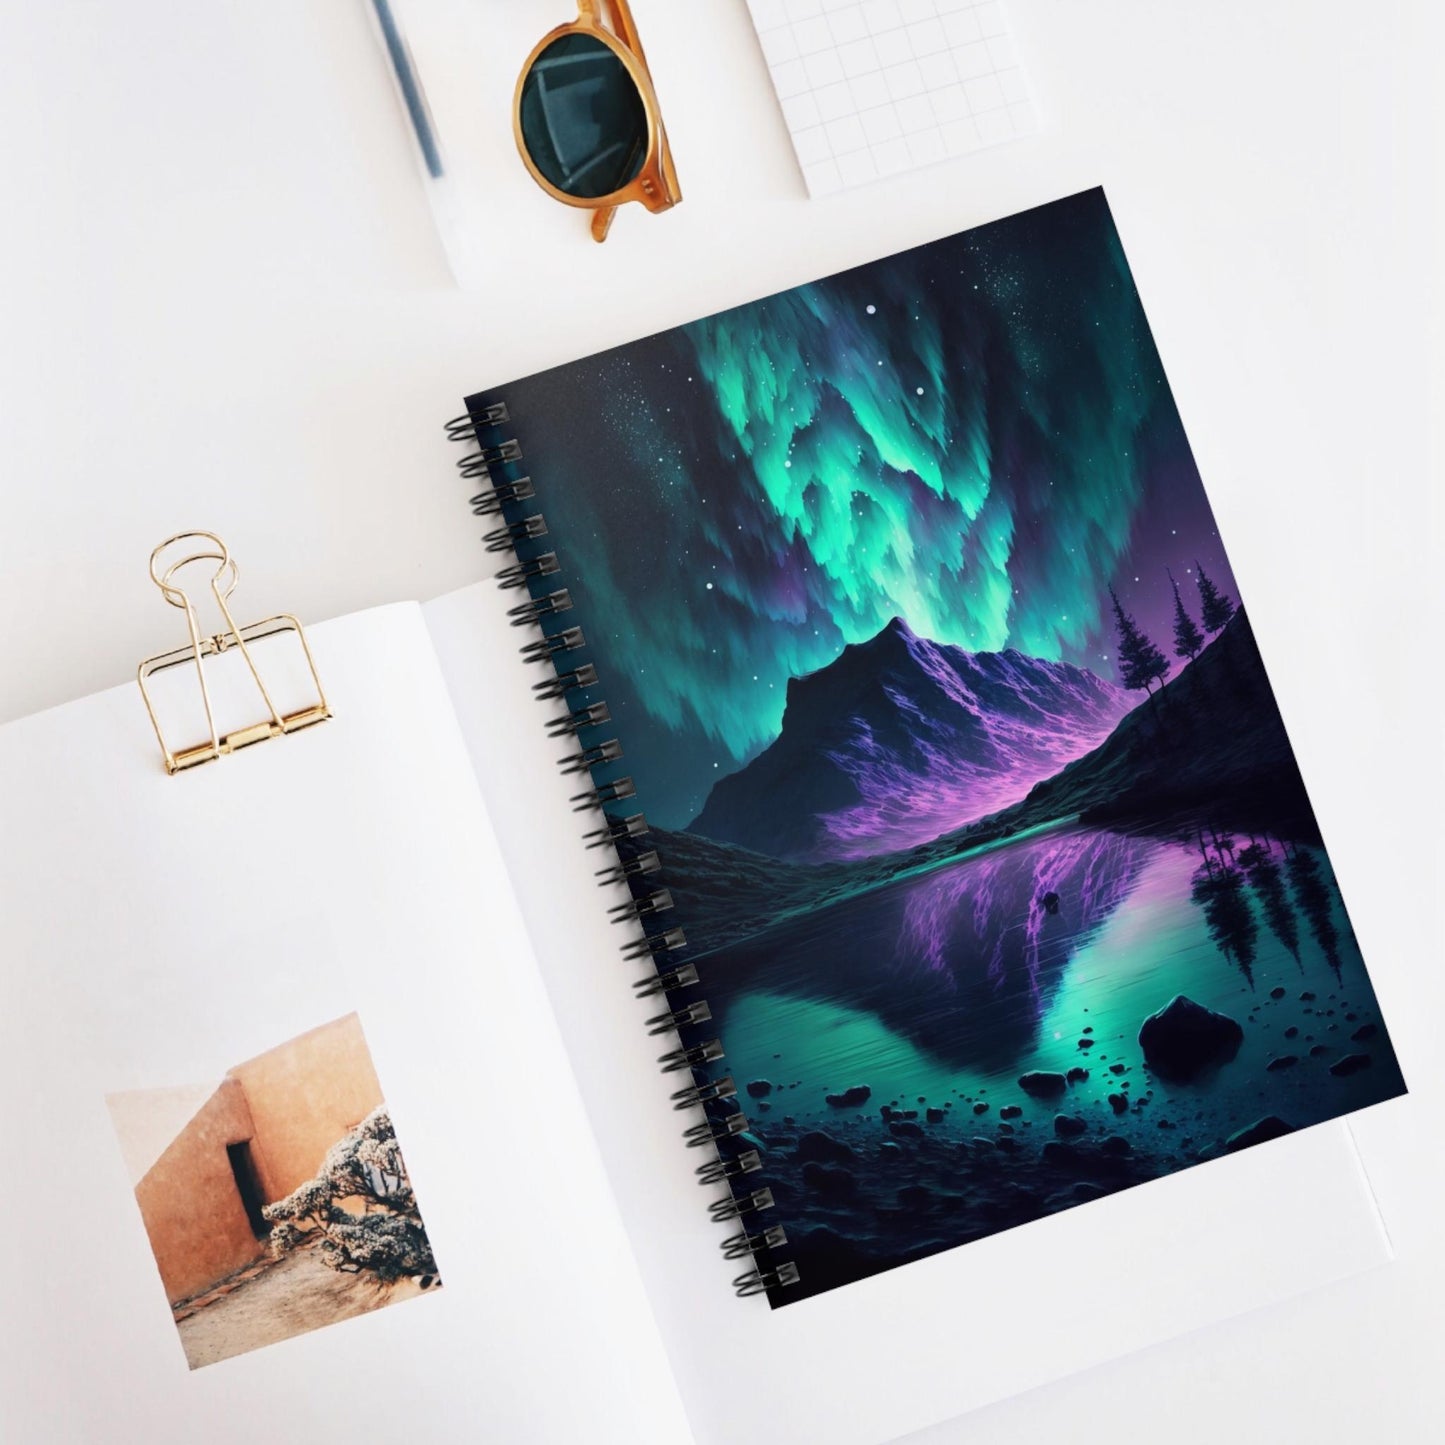 Unique Aurora Borealis Spiral Notebook Ruled Line - Personalized Northern Light View - Stationary Accessories - Perfect Aurora Lovers Gift 41